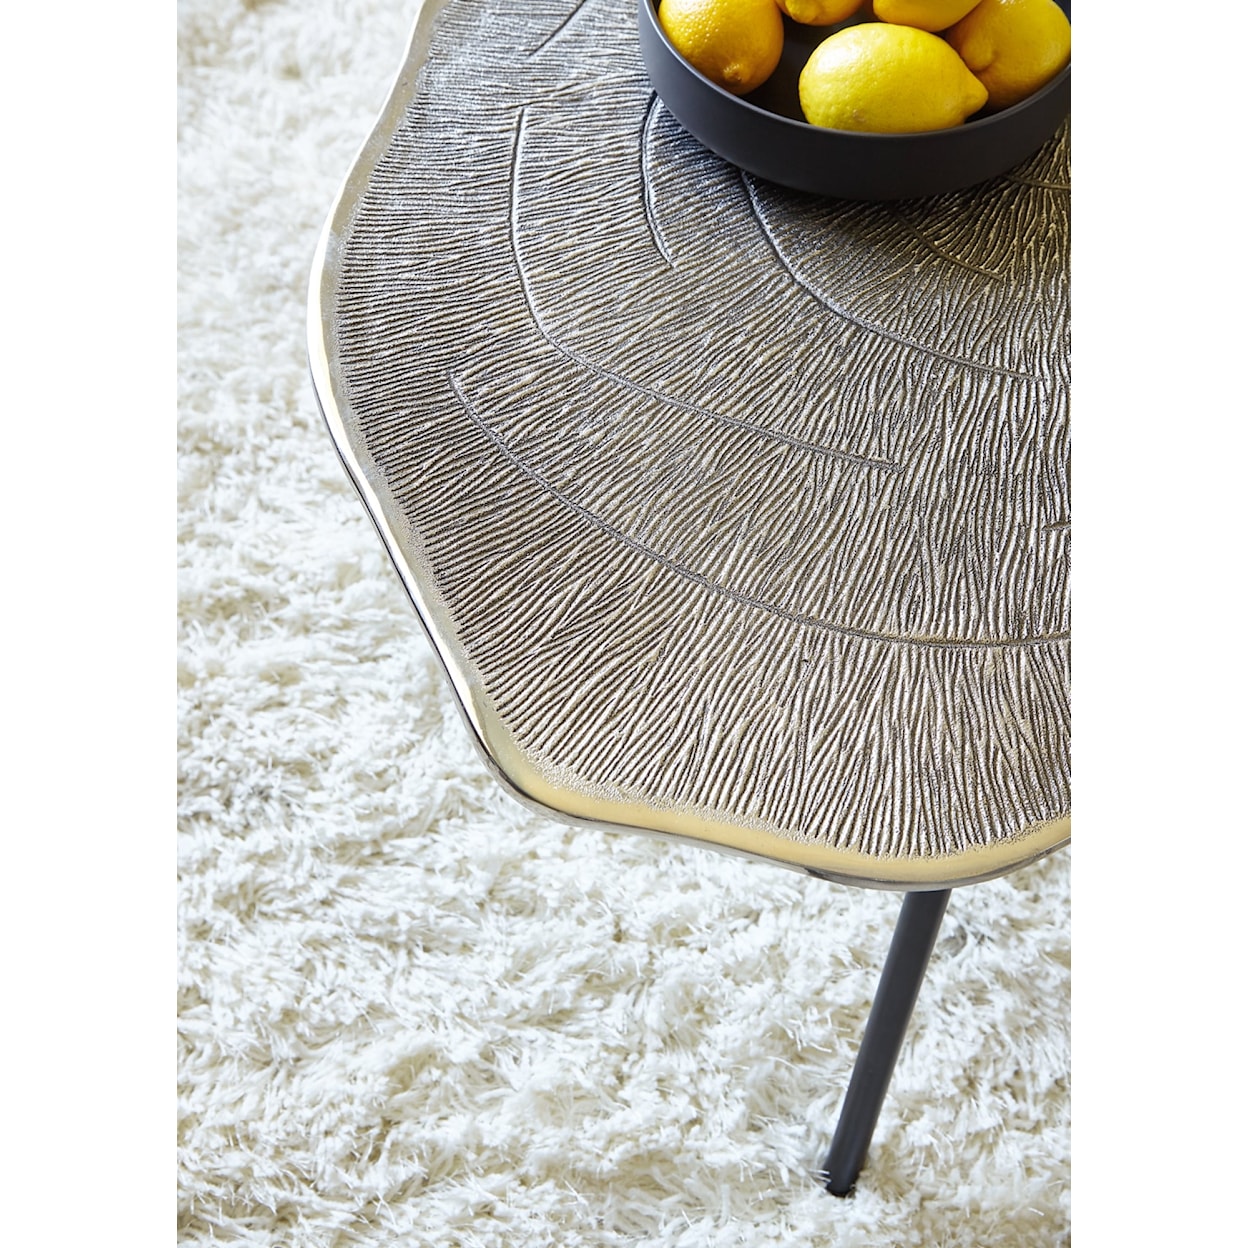 Signature Design by Ashley Furniture Laverford Oval Cocktail Table